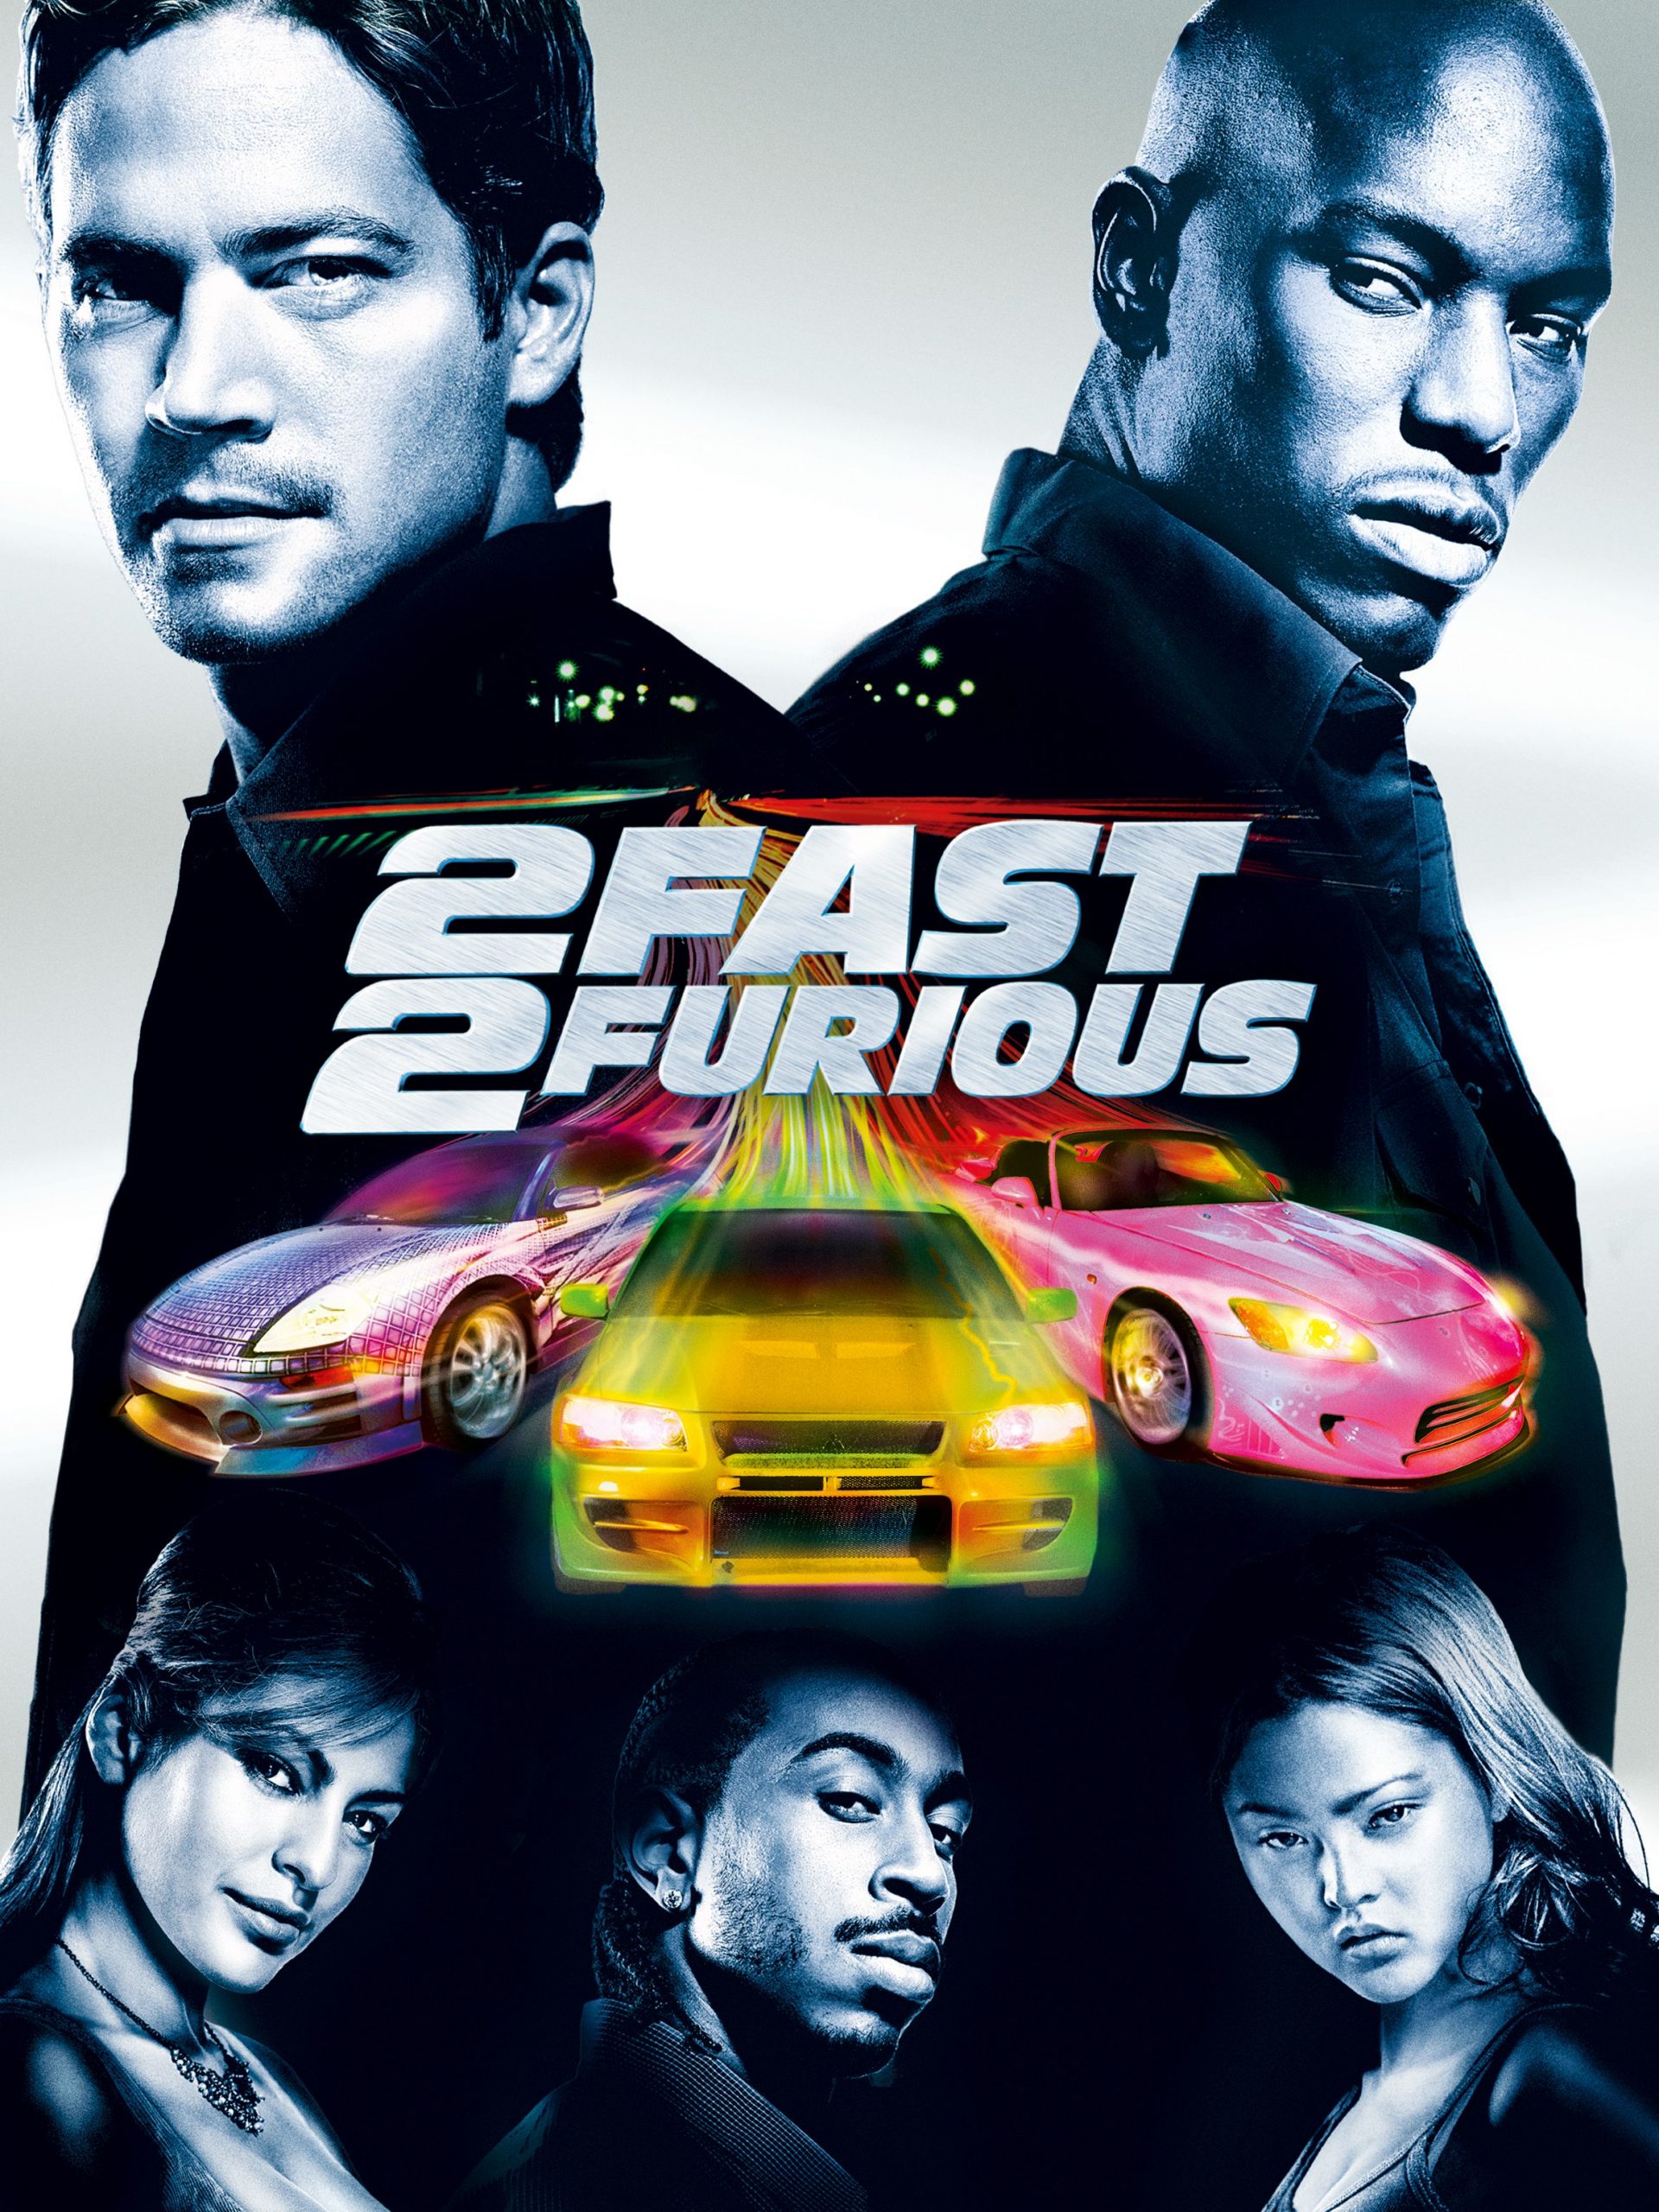 2 fast 2 furious free download mp4